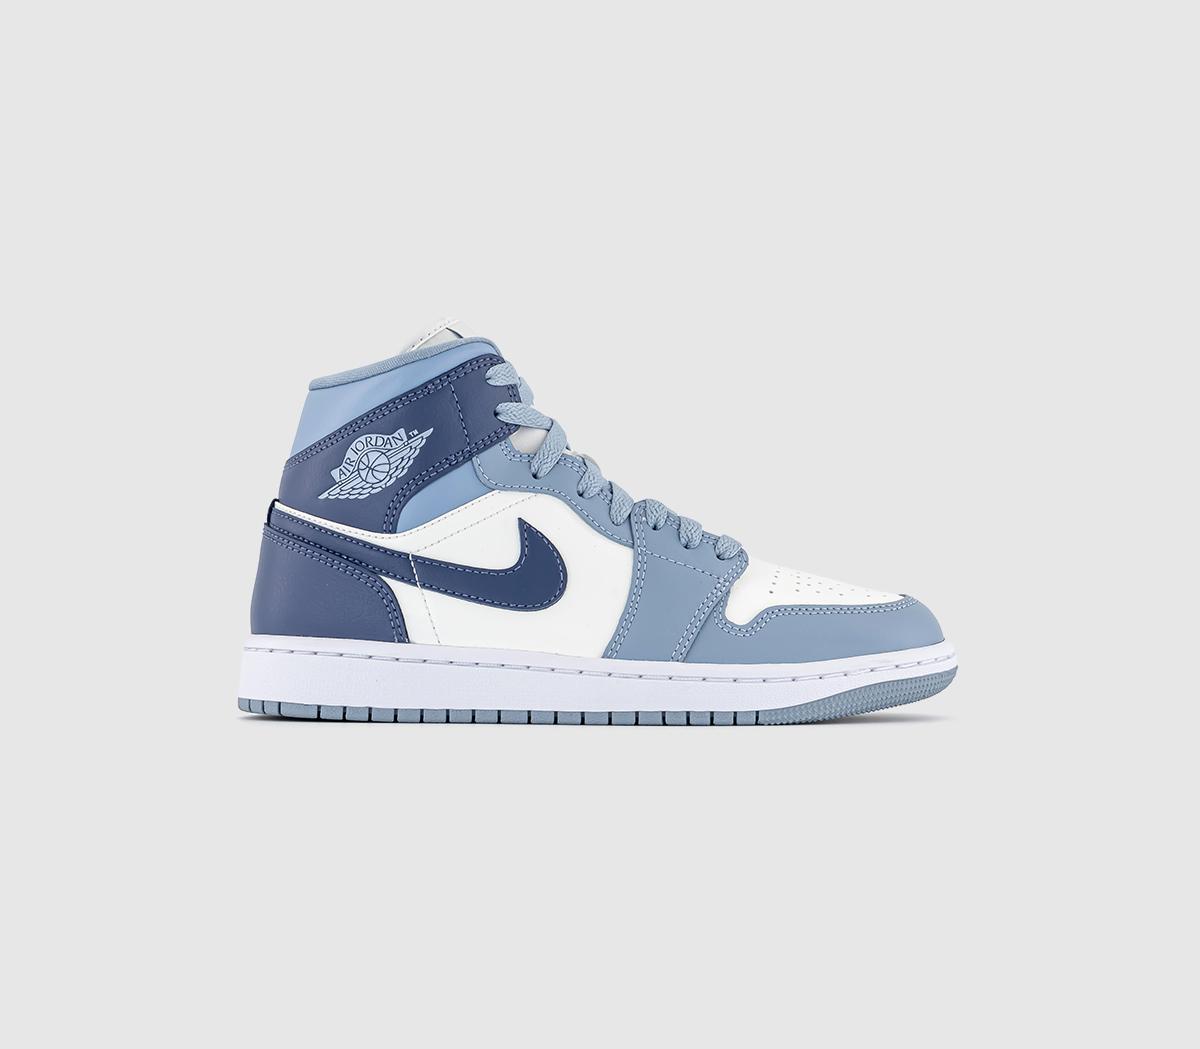 Air 1 Mid Trainers Sail Diffused Blue Grey White